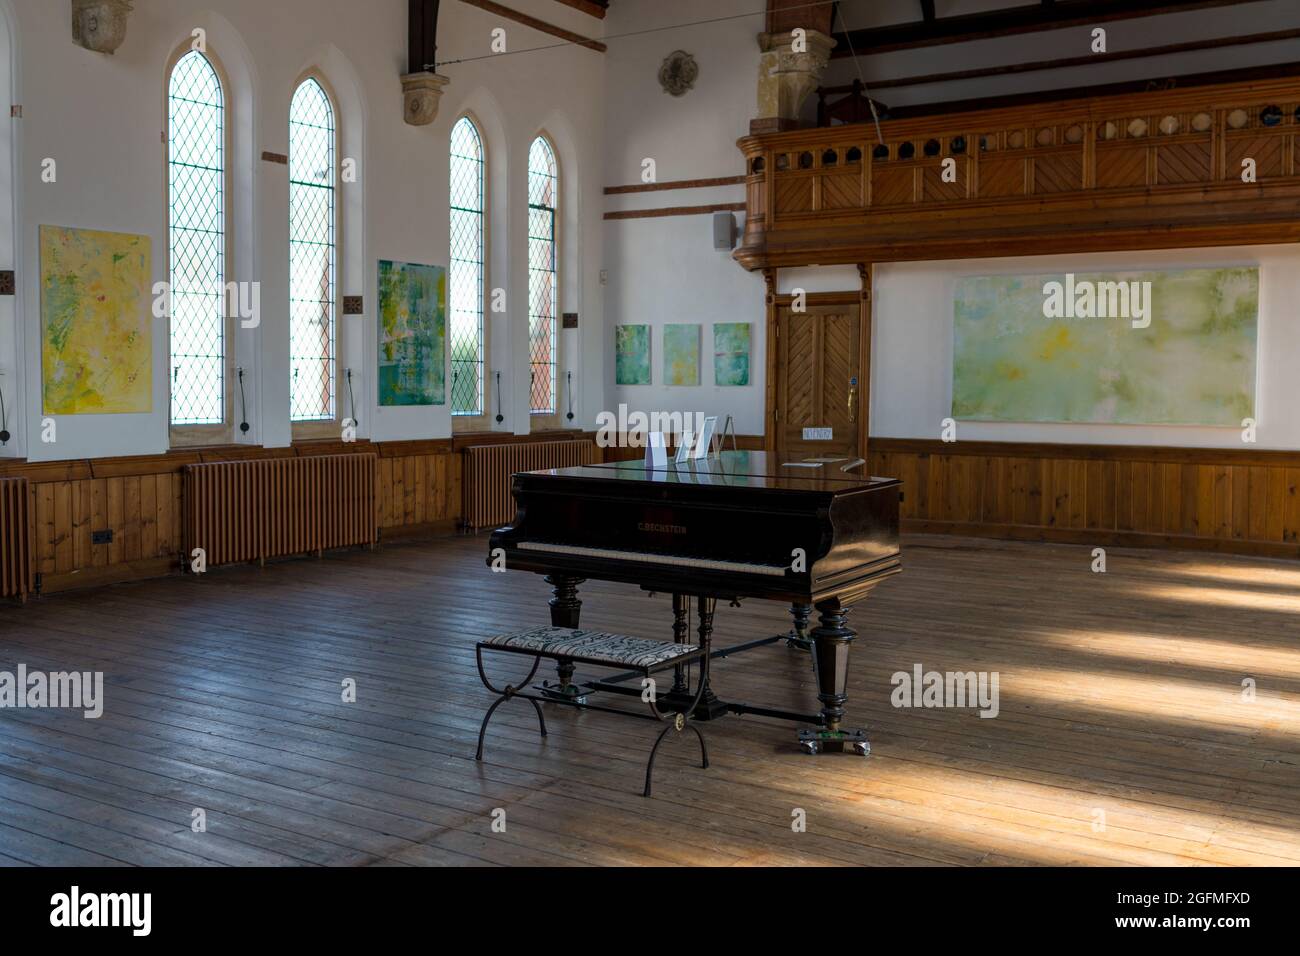 The Art Shop and Chapel, exhibition space, cafe and cultural centre, Abergavenny, Monmouthshire, Wales, UK Stock Photo